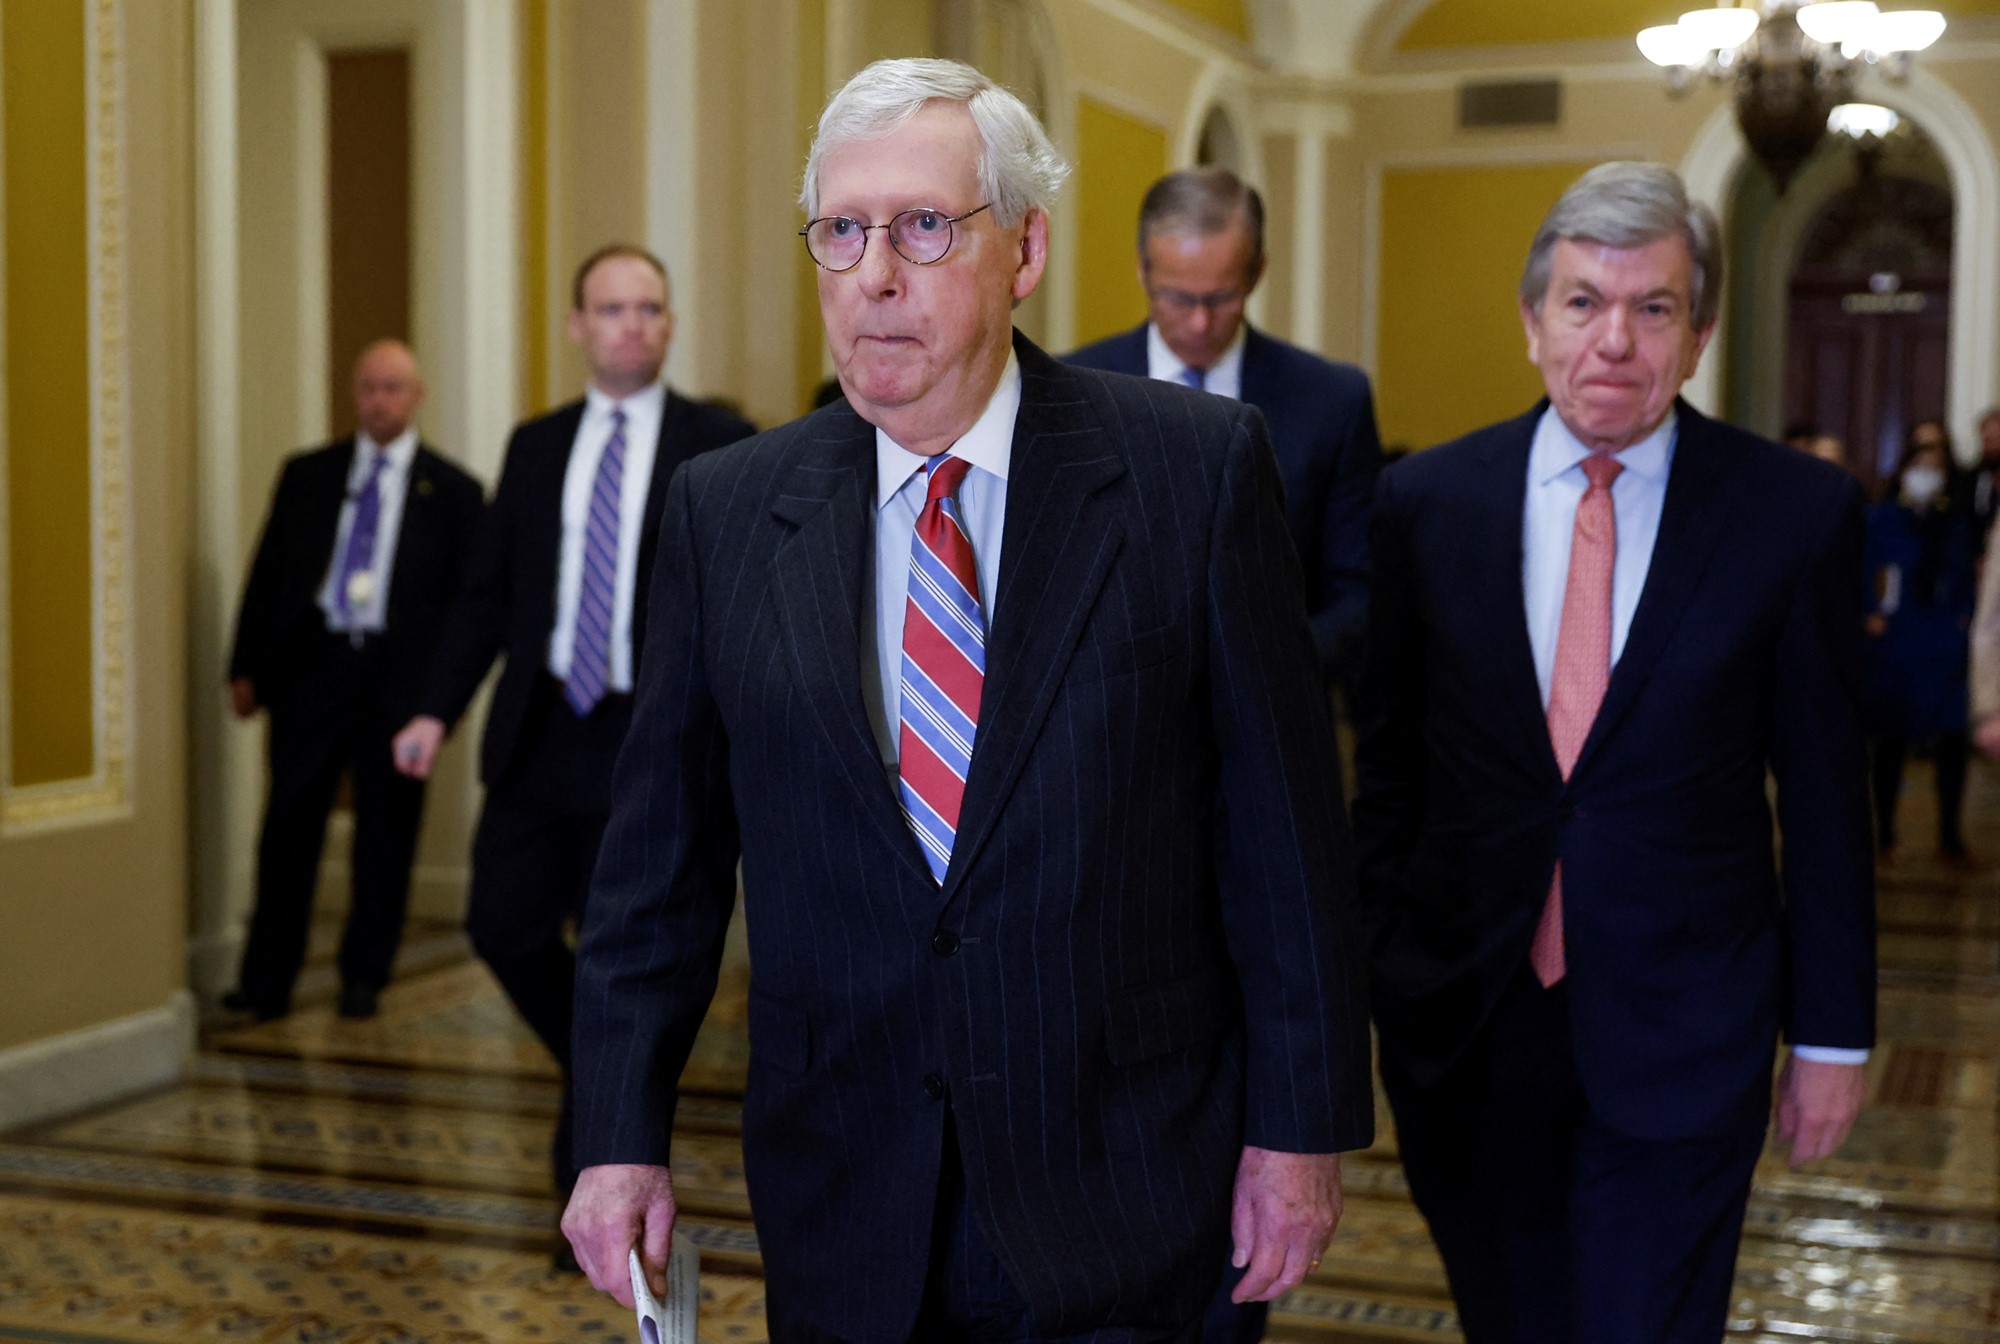 U.S. Senate Minority Leader Mitch McConnell (R-KY) arrives to face reporters at a news conference following the Senate Republicans weekly policy lunch at the U.S. Capitol in Washington, U.S., December 20, 2022